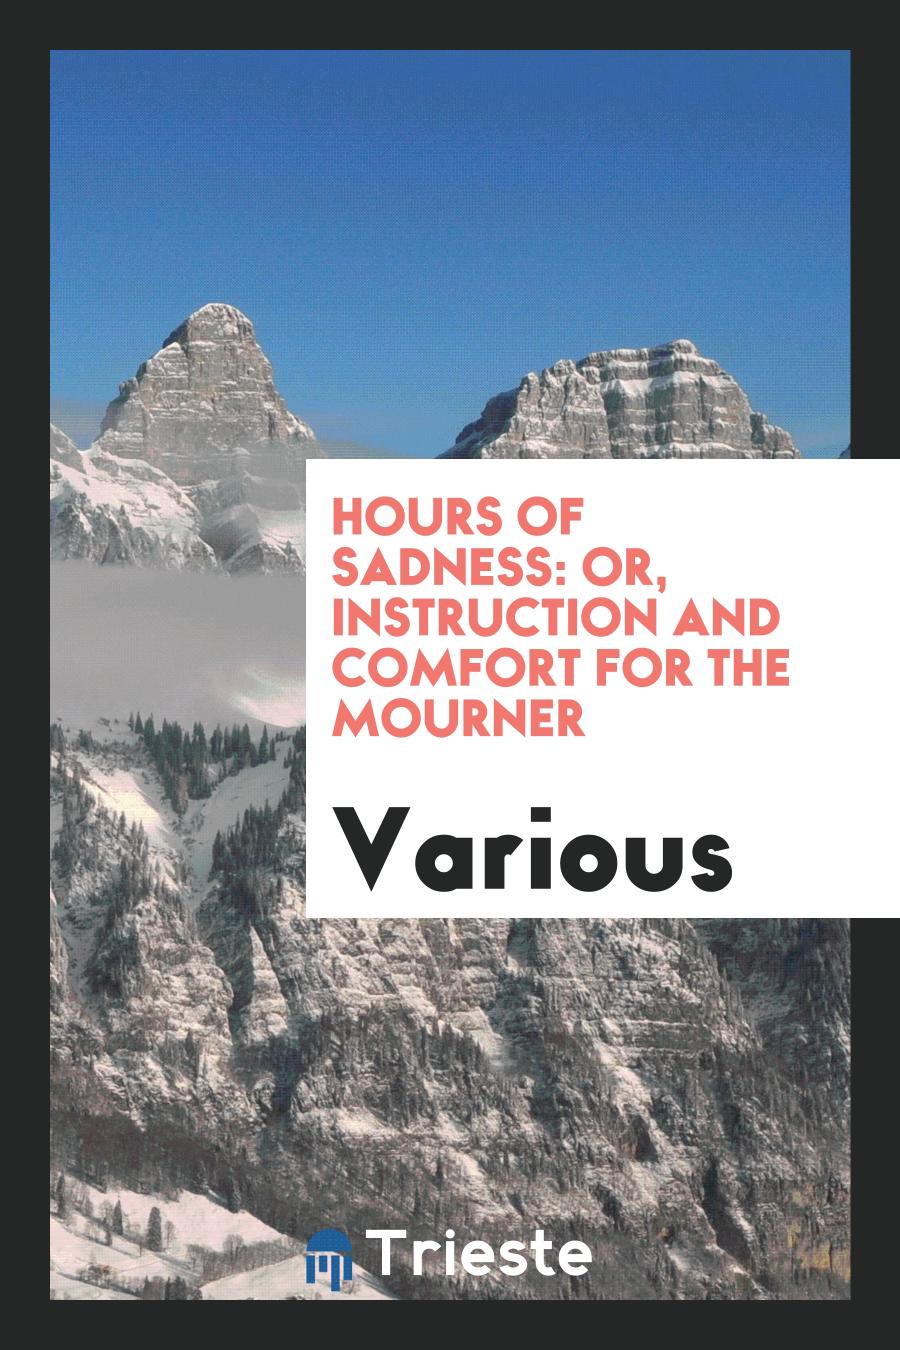 Hours of Sadness: Or, Instruction and Comfort for the Mourner